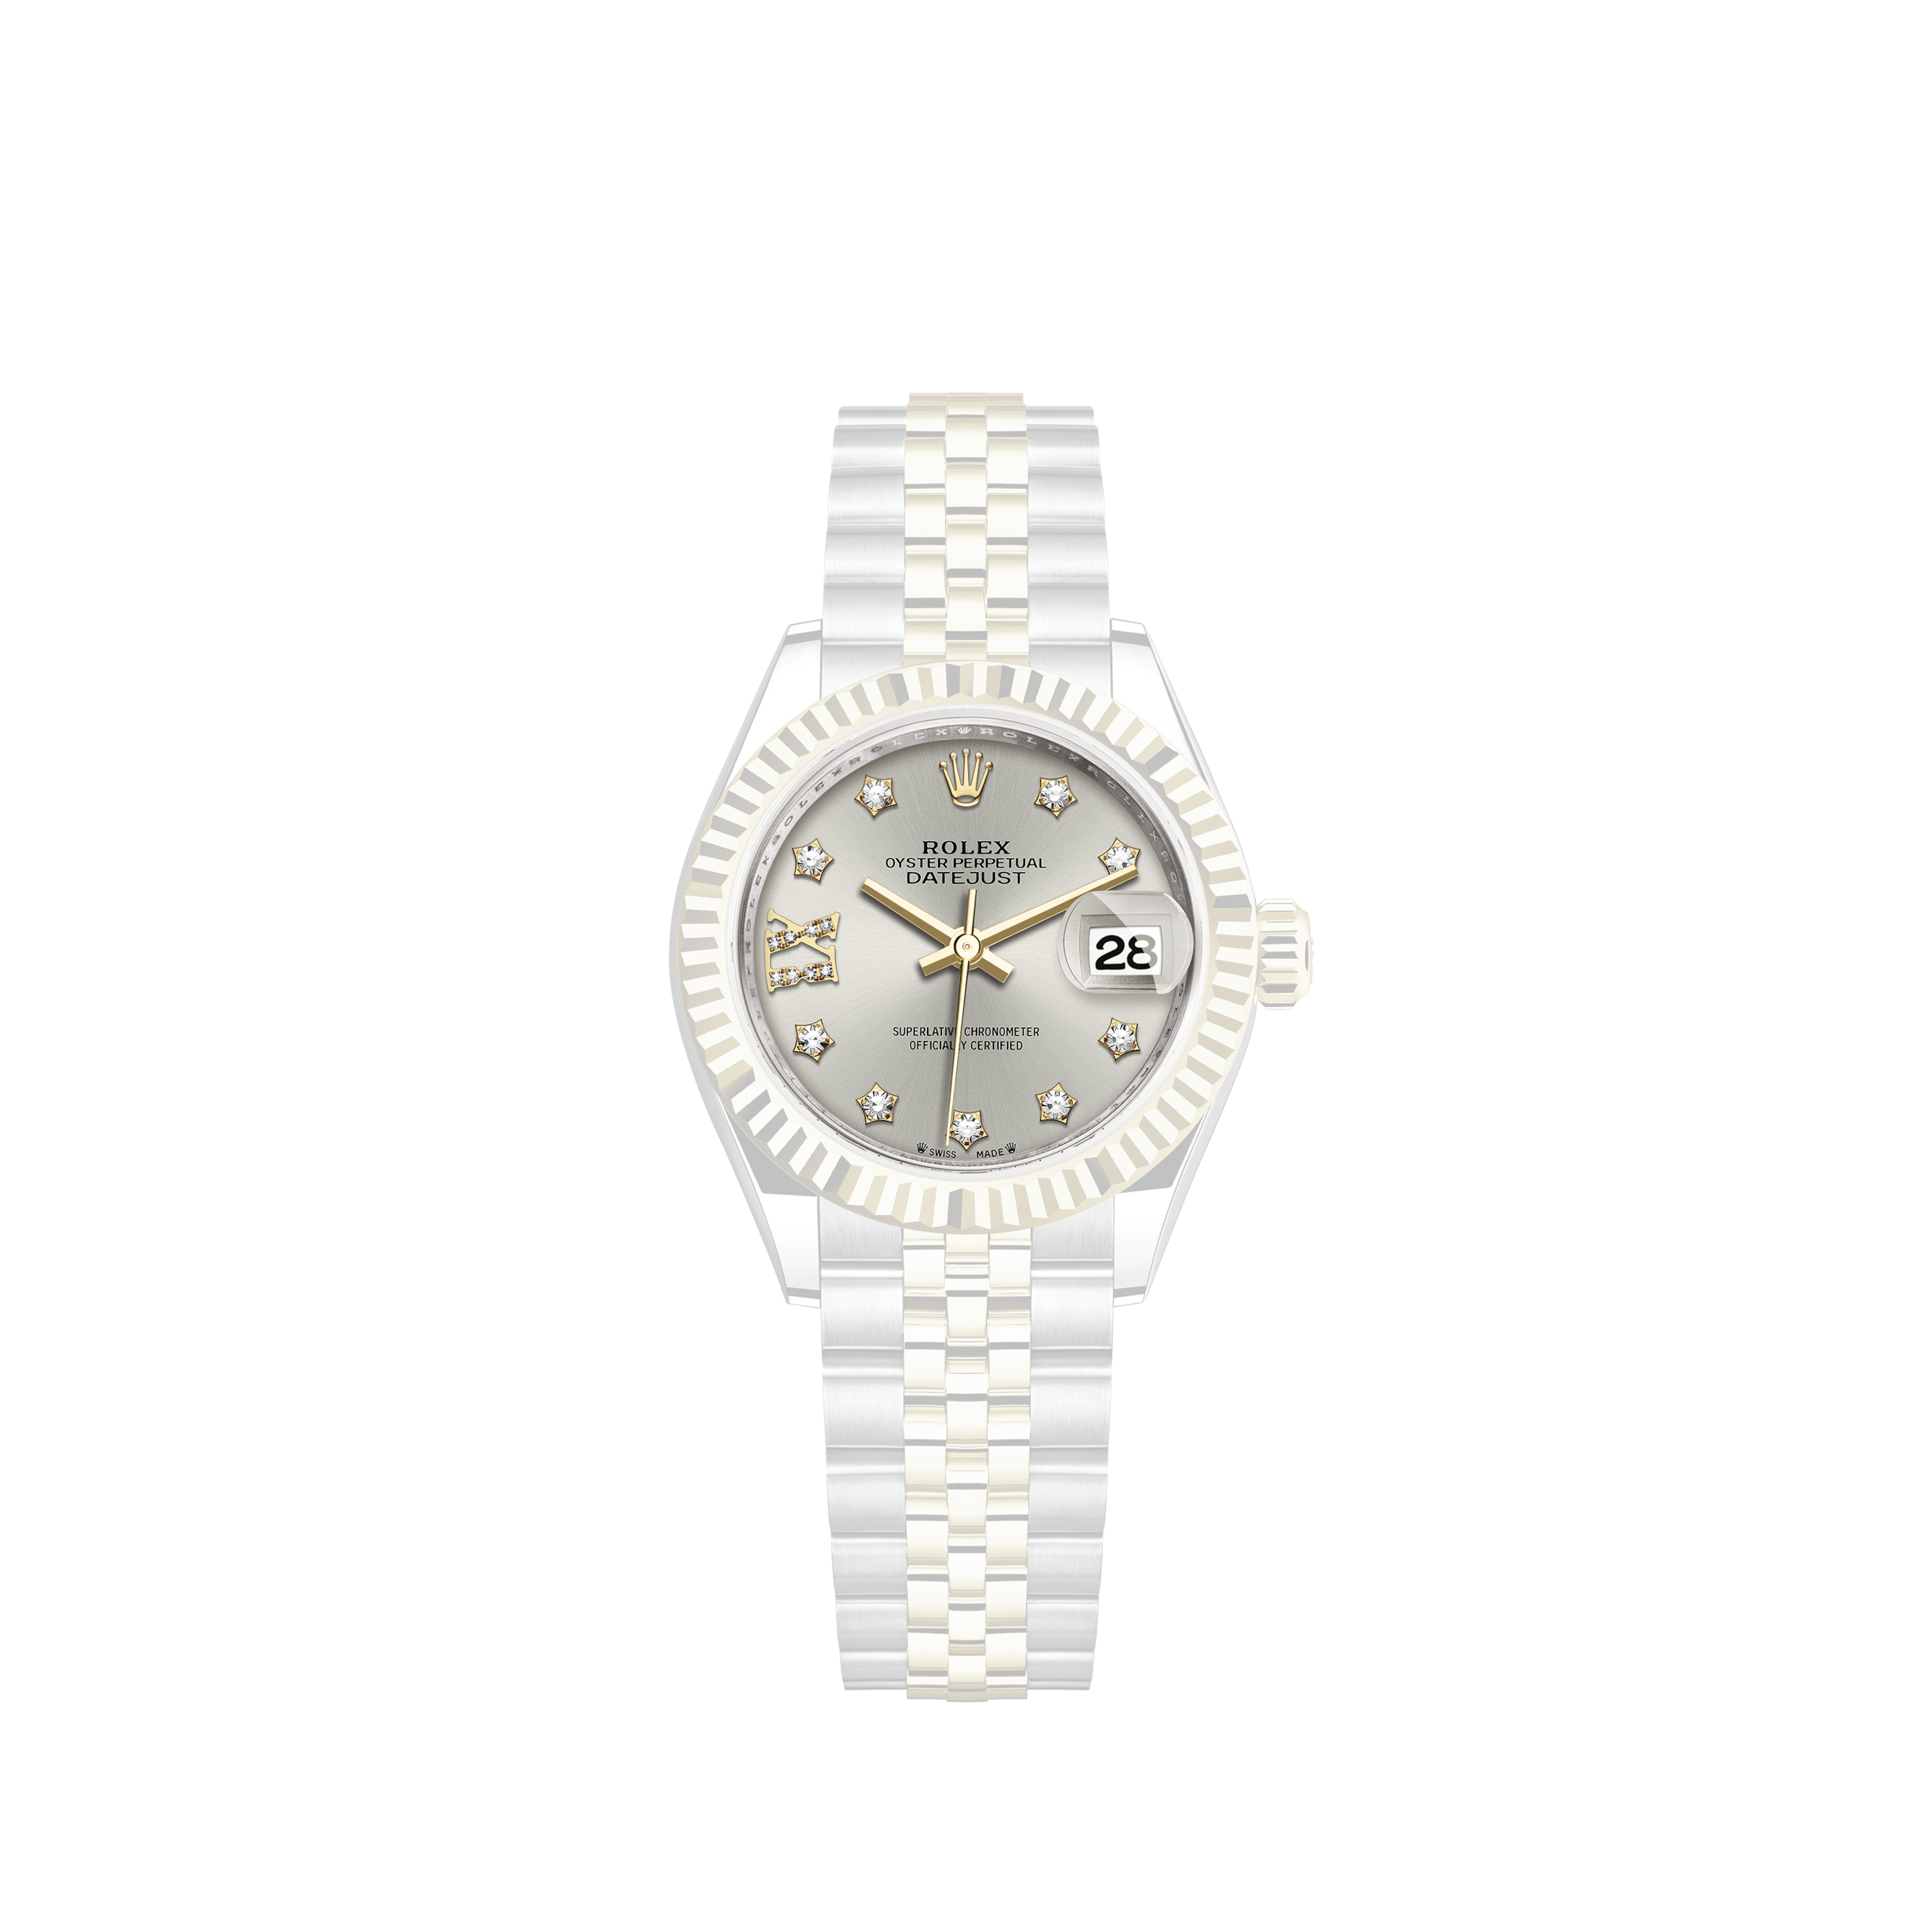 Rolex Datejust 126233 champagne dial full set from 2018